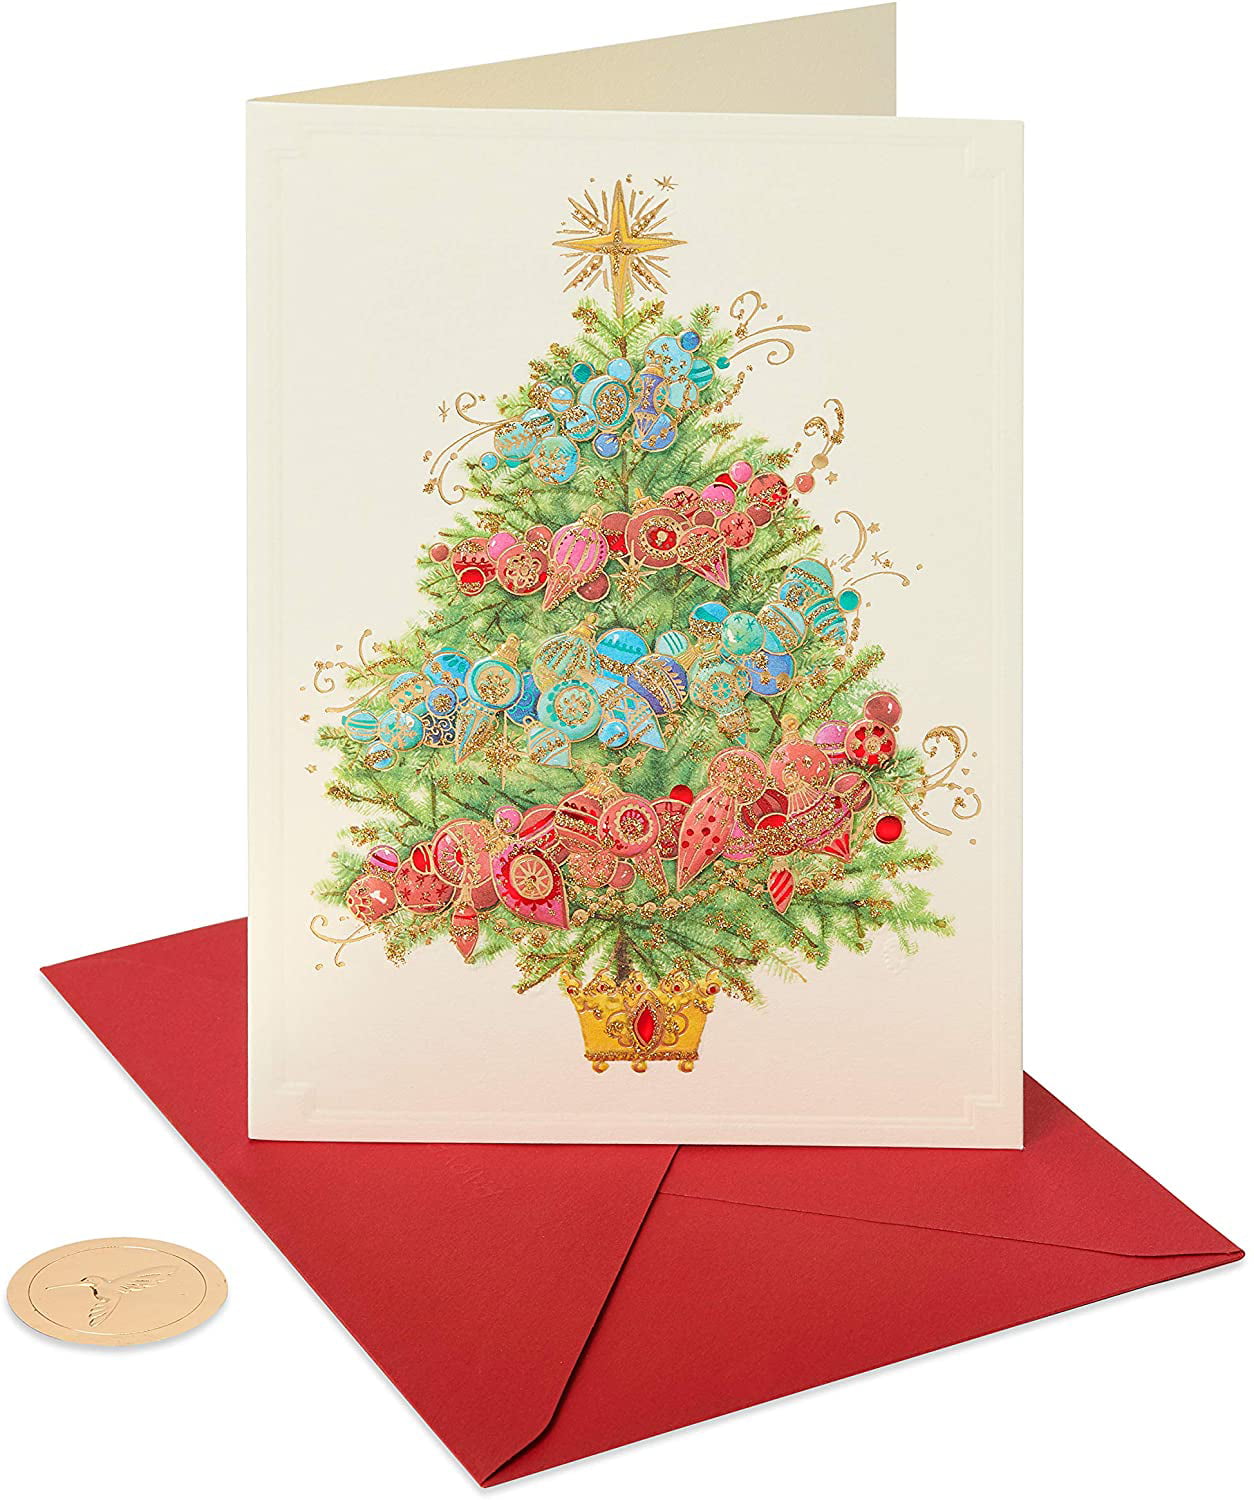 12-Count Papyrus Decorative Christmas Tree Christmas Cards Boxed with Gold Foil-Lined Red Envelopes 